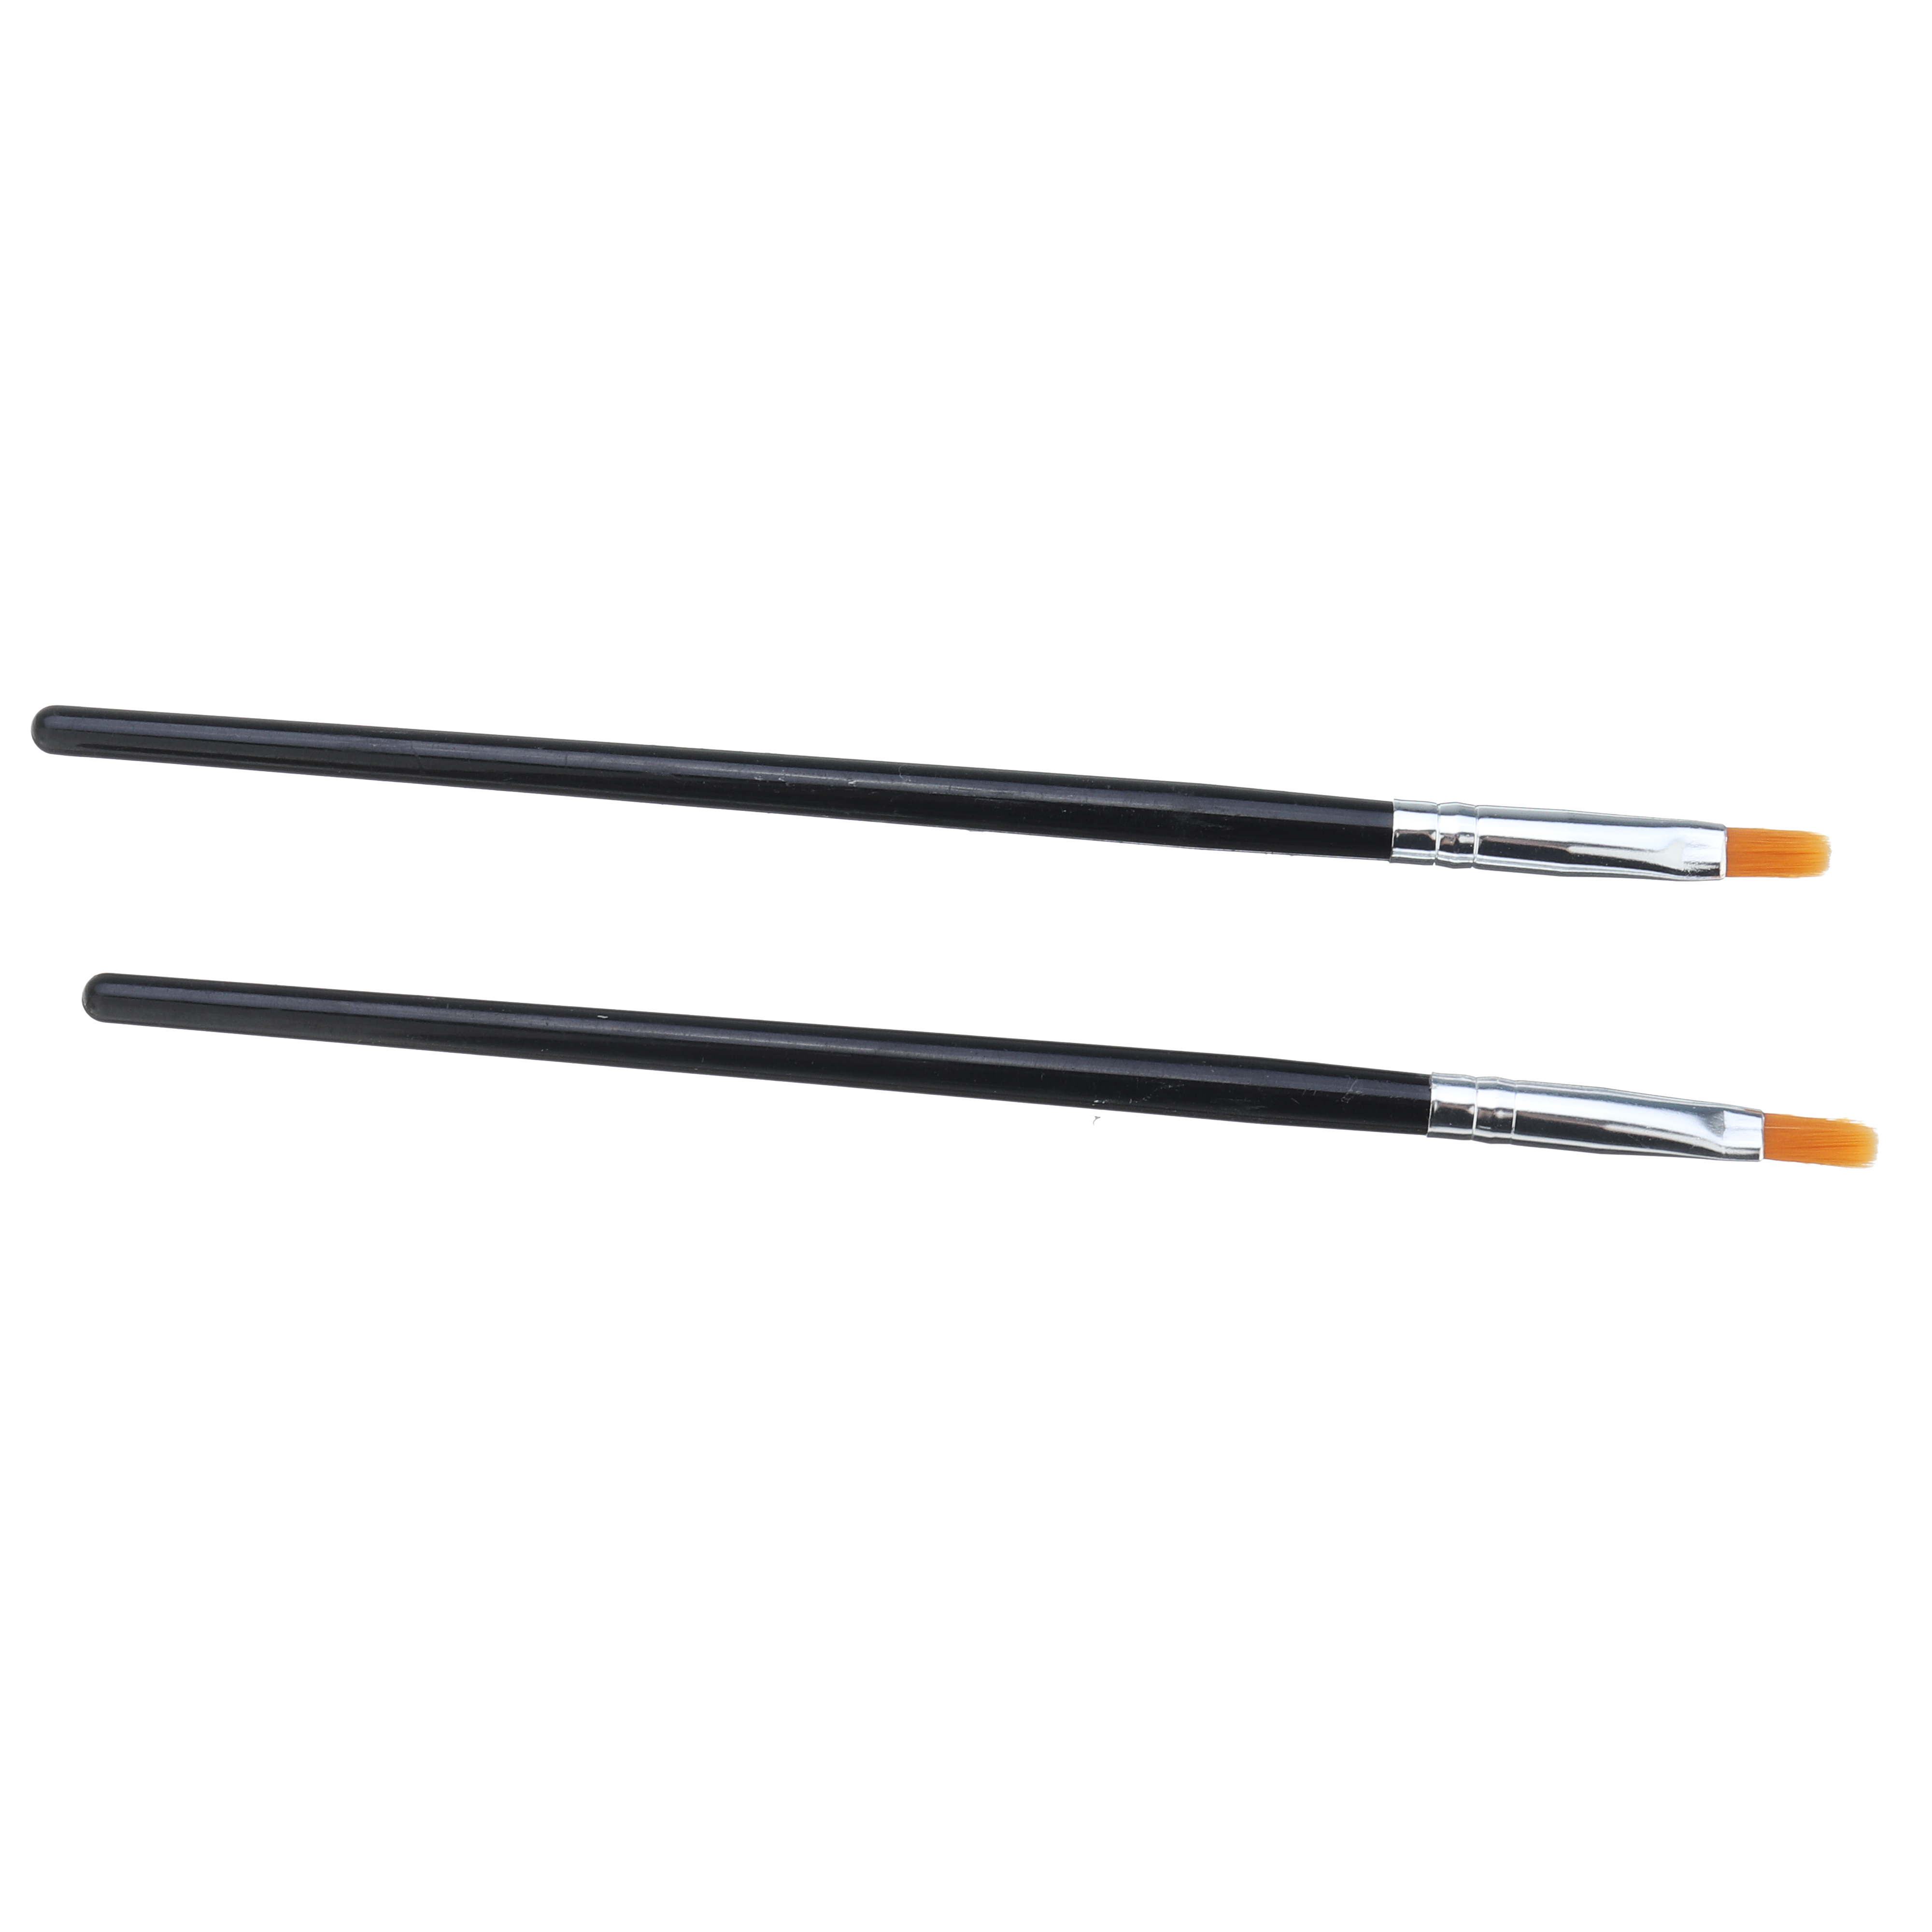 2Pcs-Model-Color-Pen-Flat-Brush-Hand-Painting-Tools-for-Oil-Painting-Pigments-1488409-5